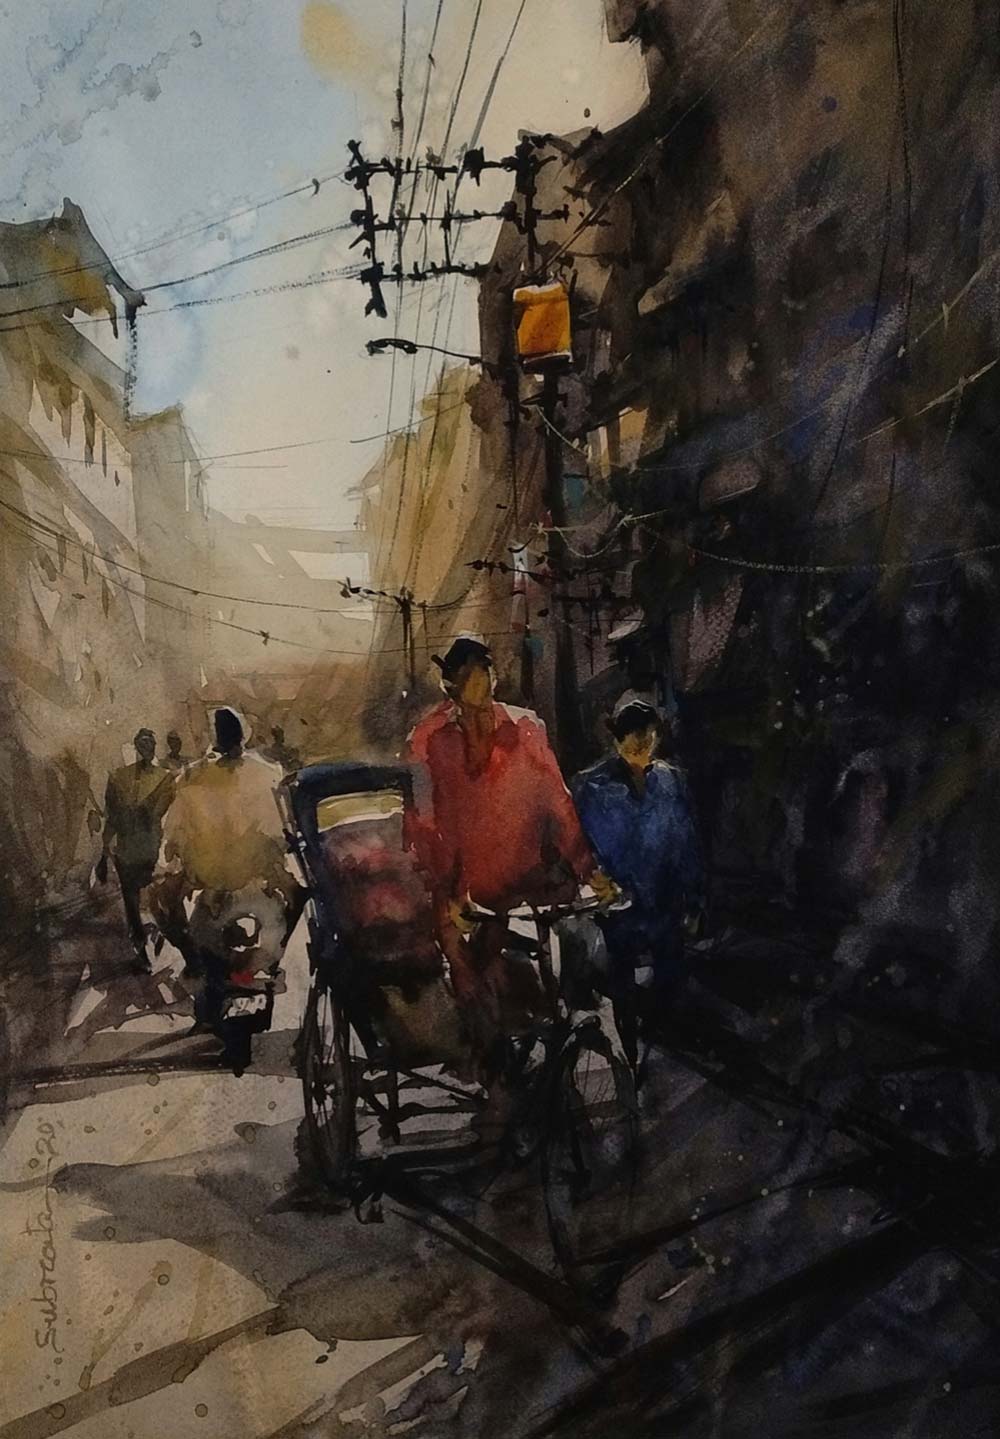 Figurative Painting with Watercolor on Paper "Untitled-7" art by Subrata Malakar